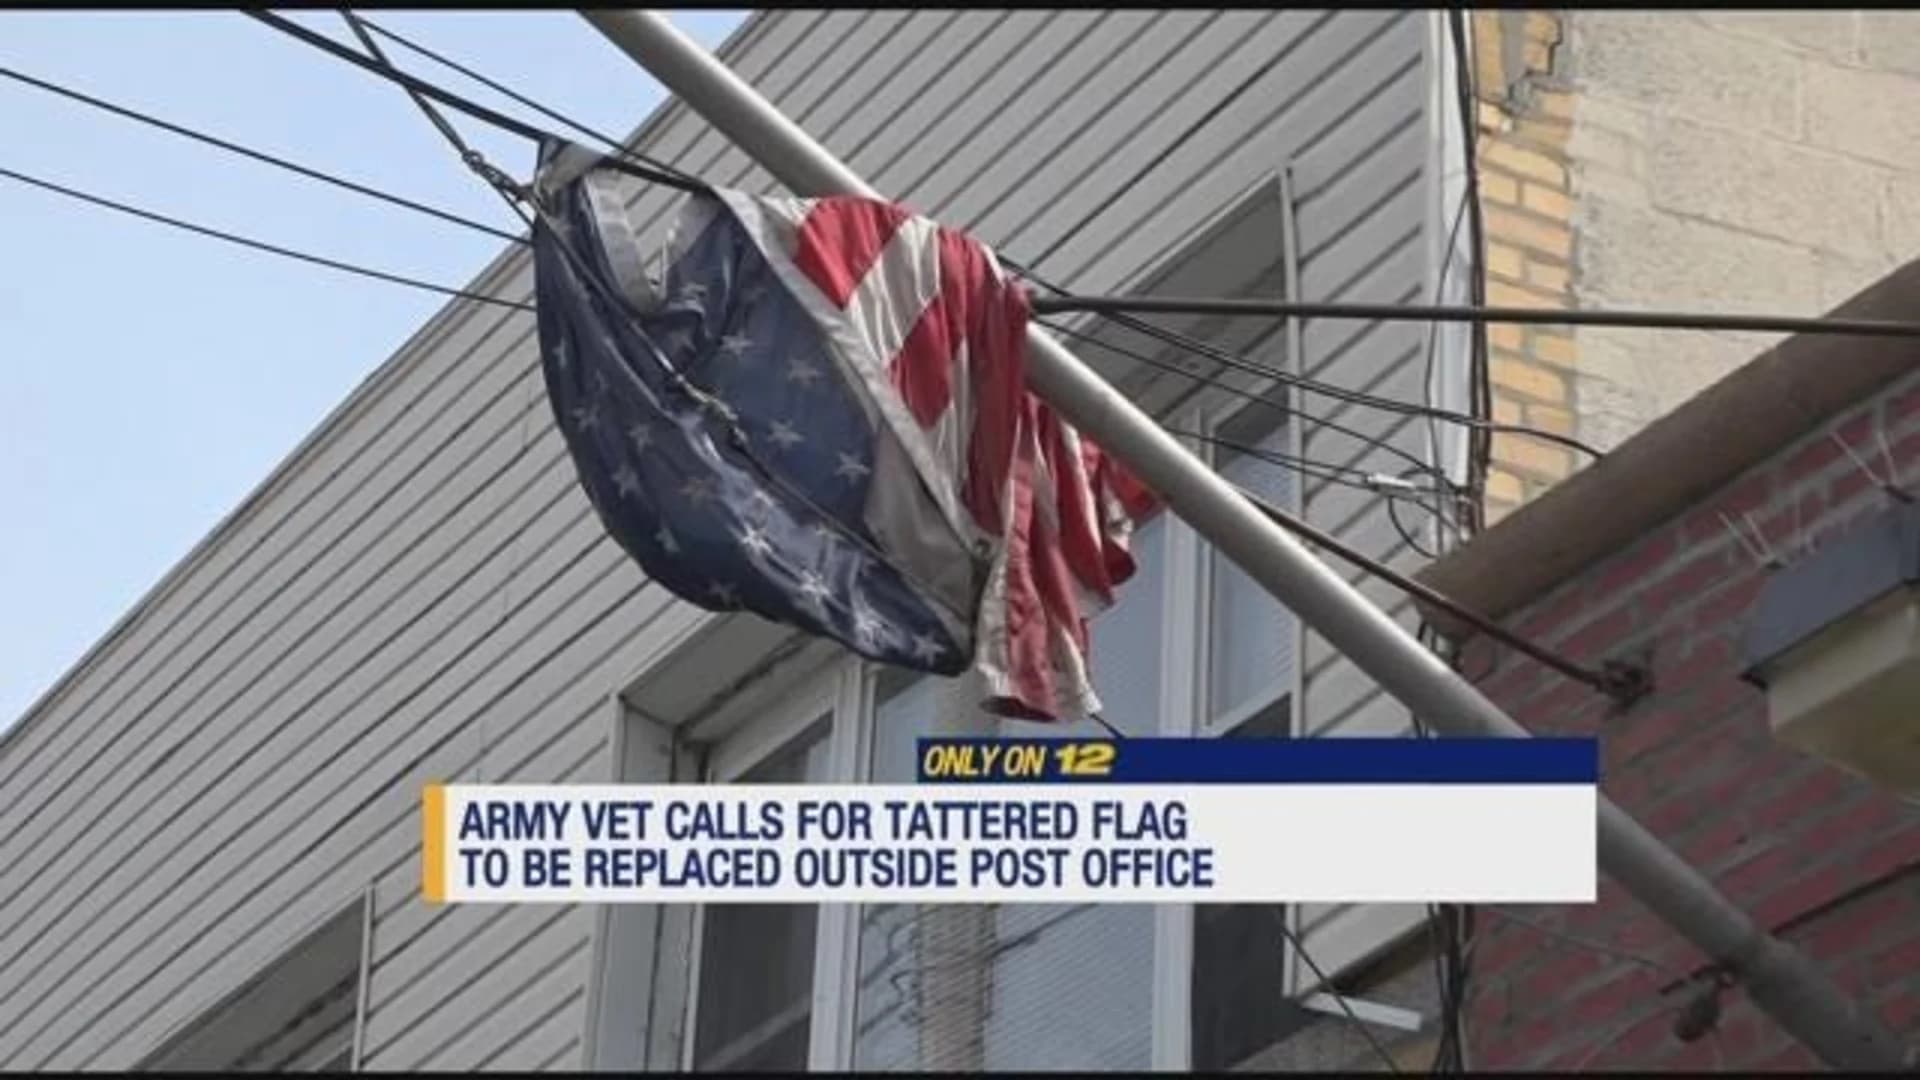 Army veteran wants tattered flag outside post office replaced